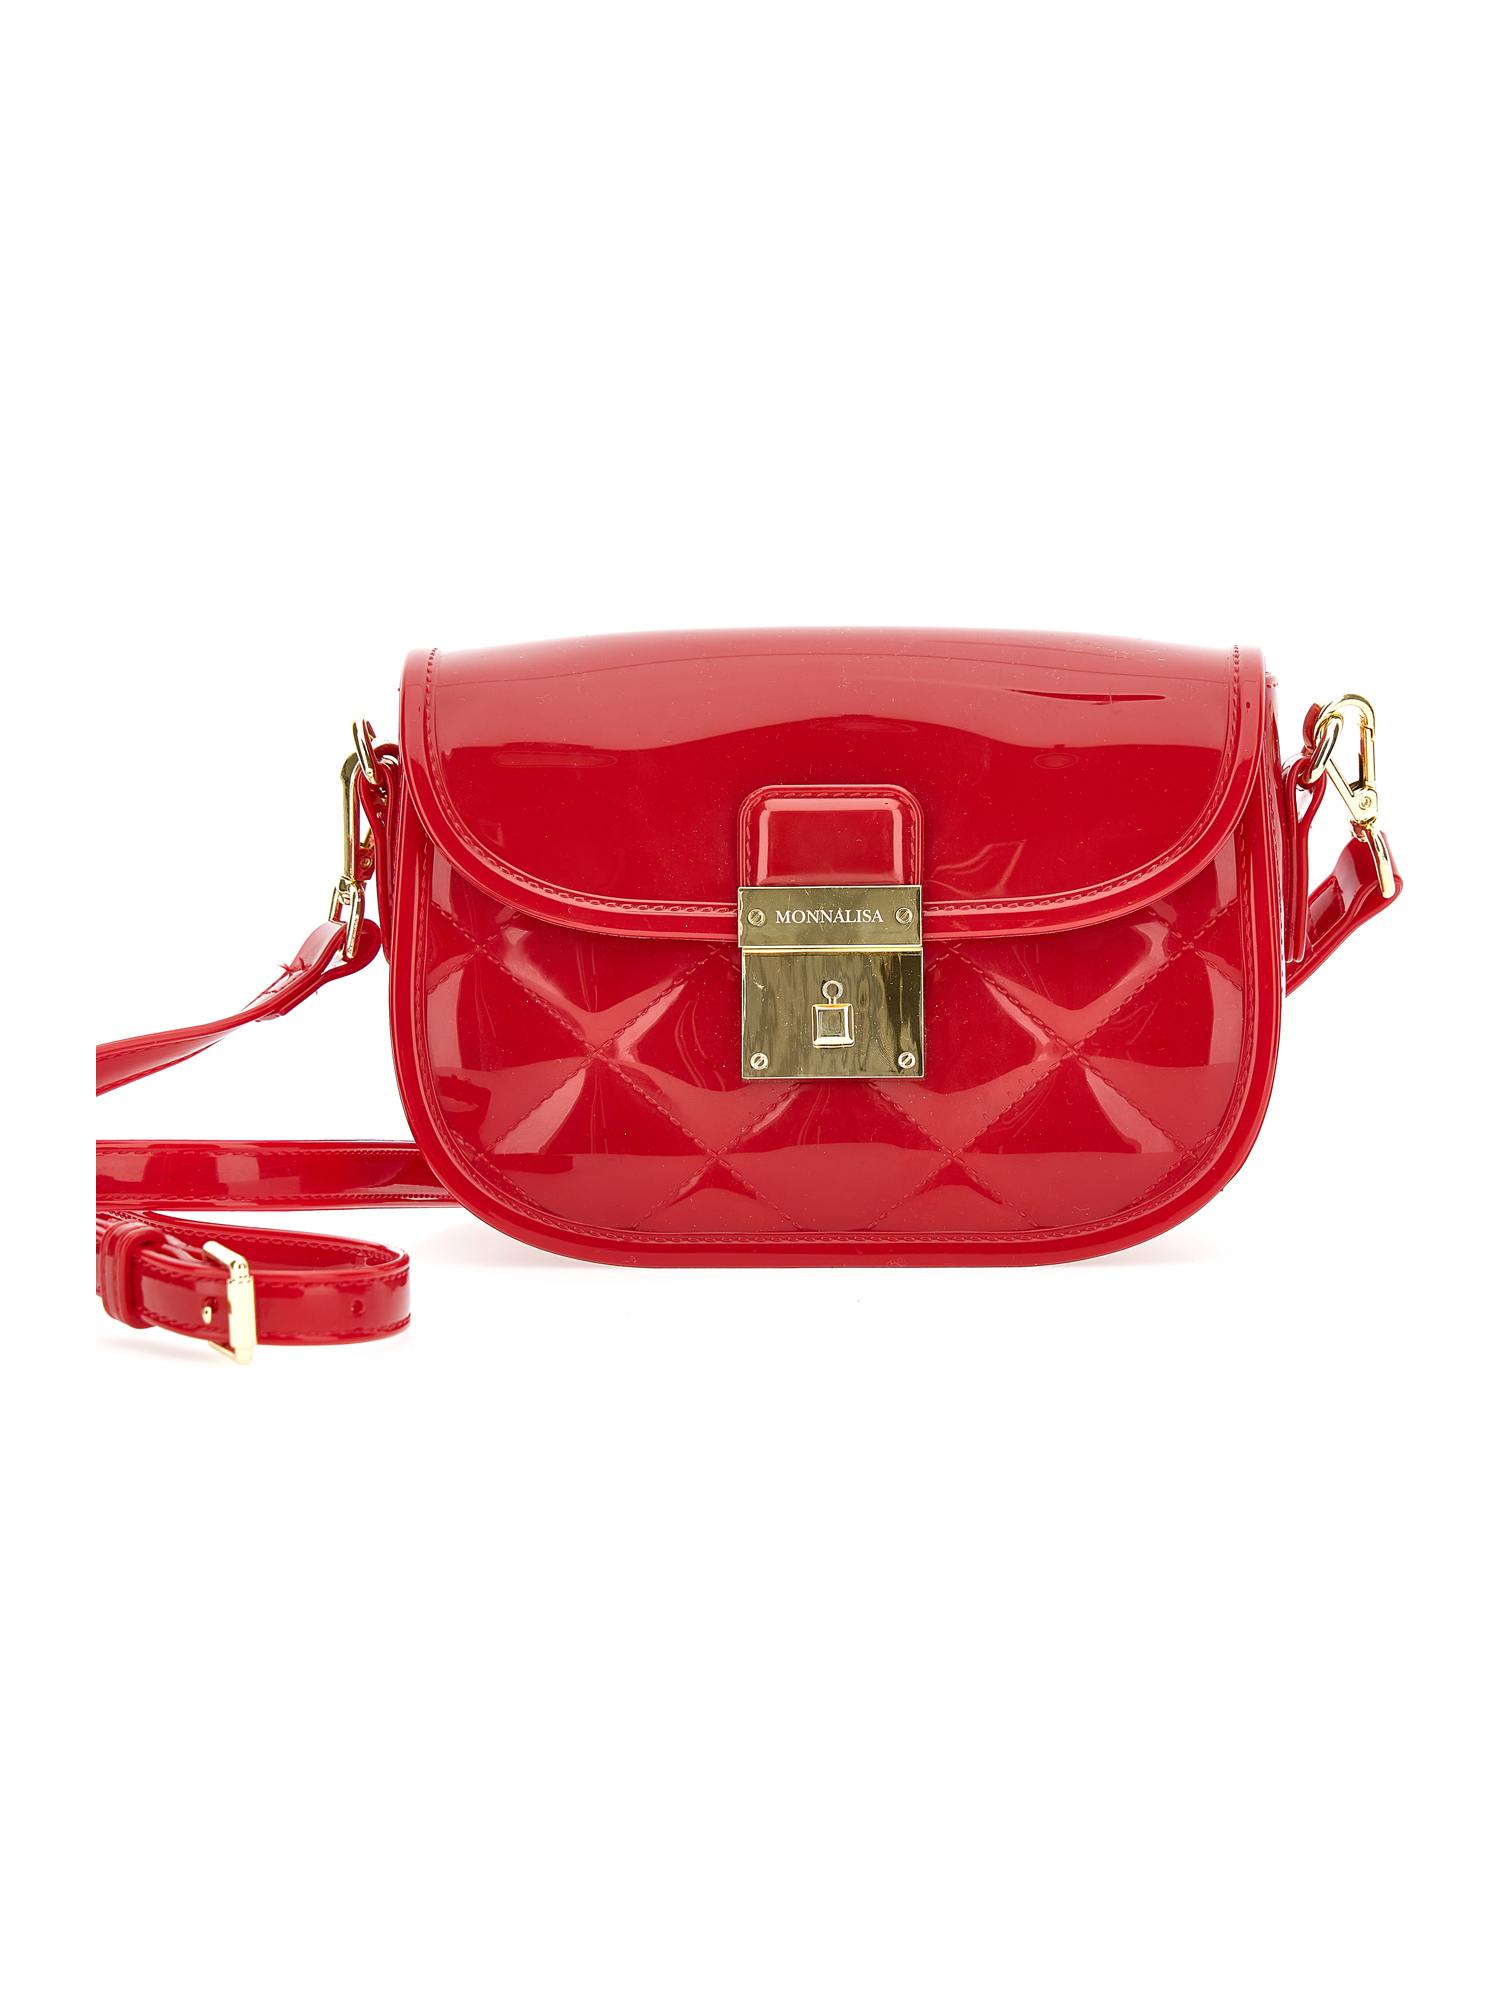 Monnalisa Pvc Bag With Shoulder Strap In Red